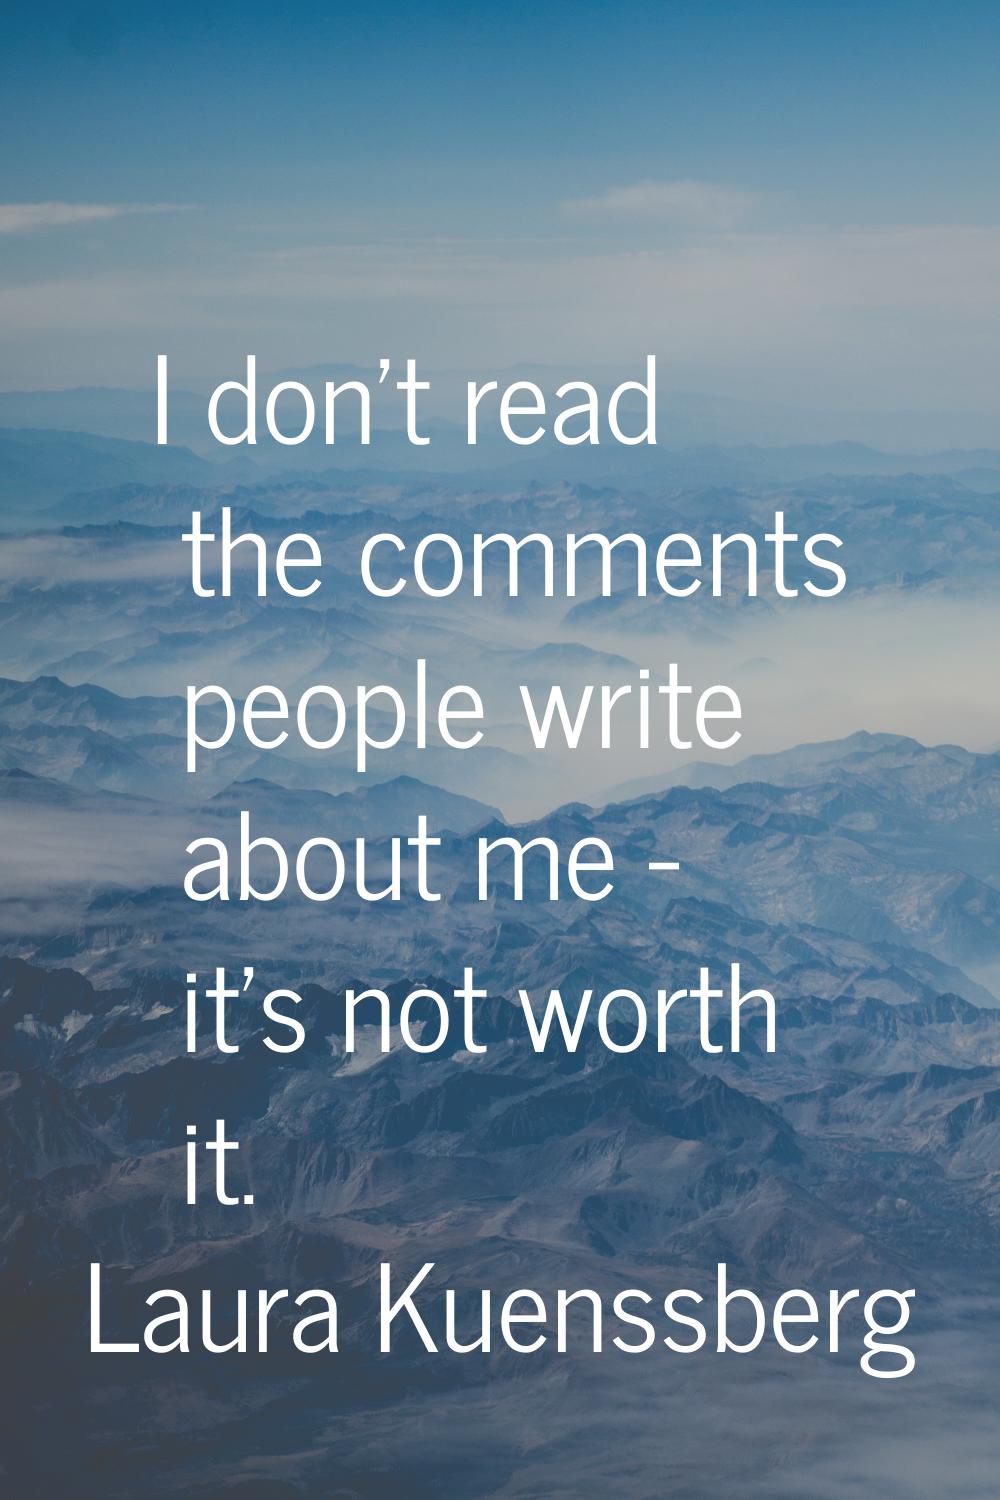 I don't read the comments people write about me - it's not worth it.